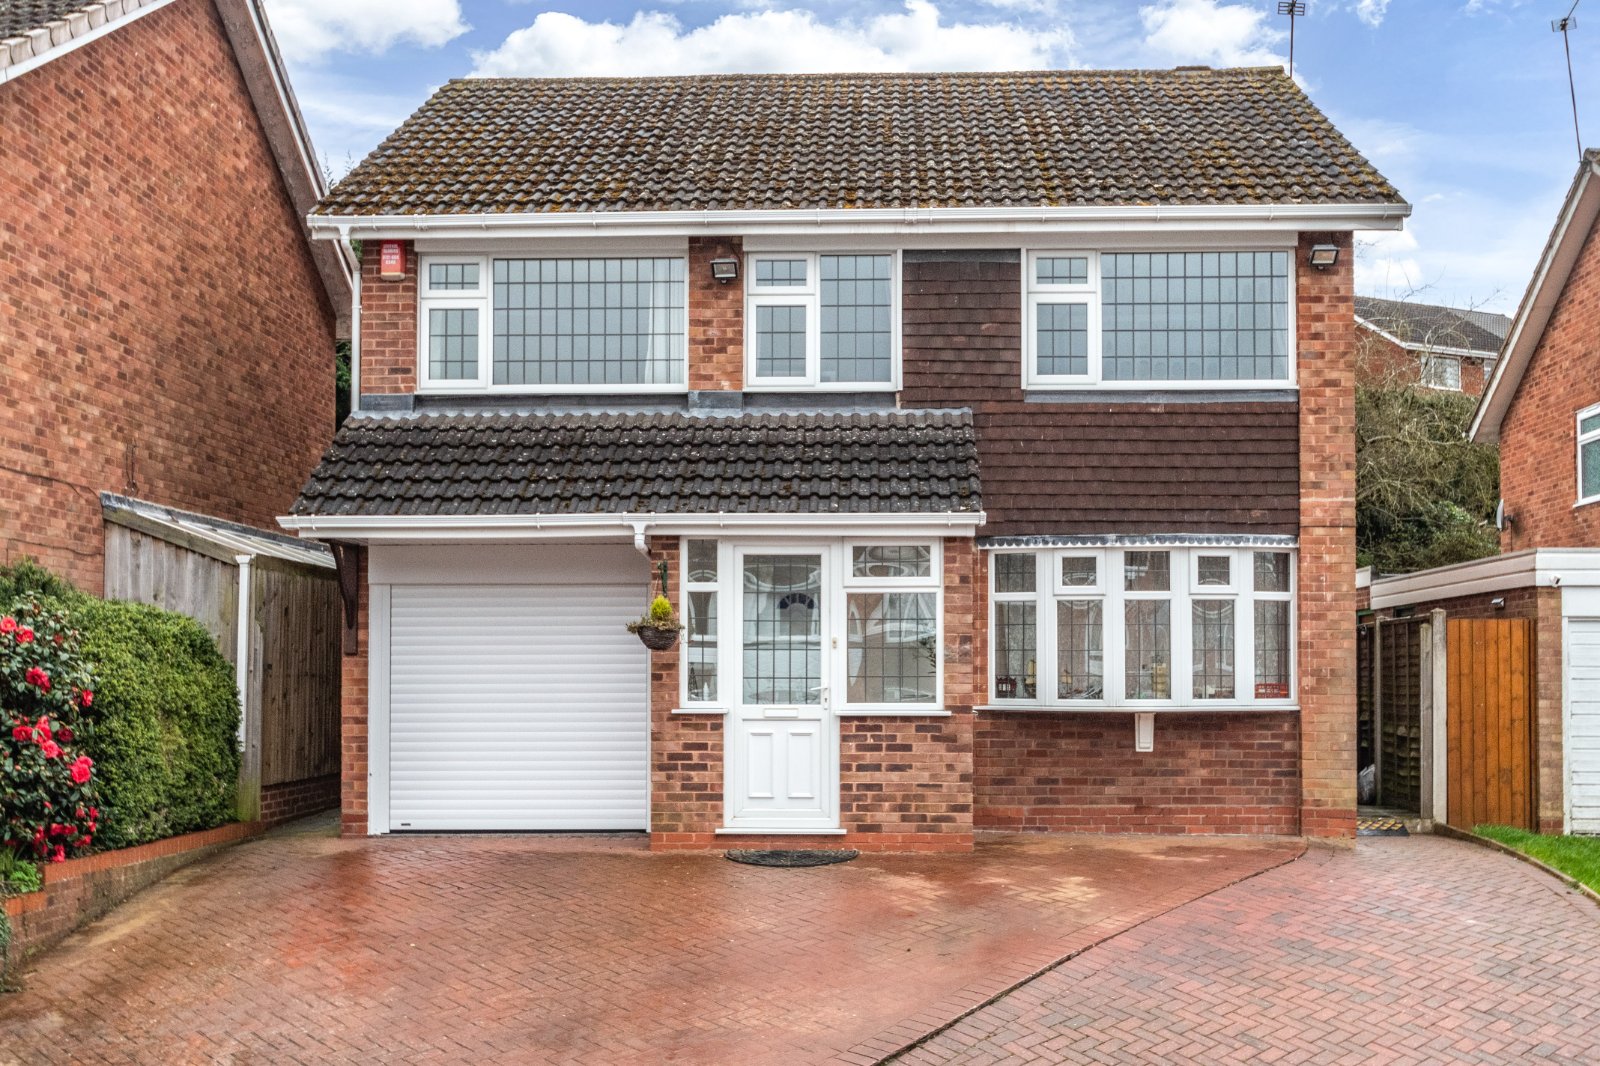 4 bed house for sale in Quantock Close, Halesowen - Property Image 1